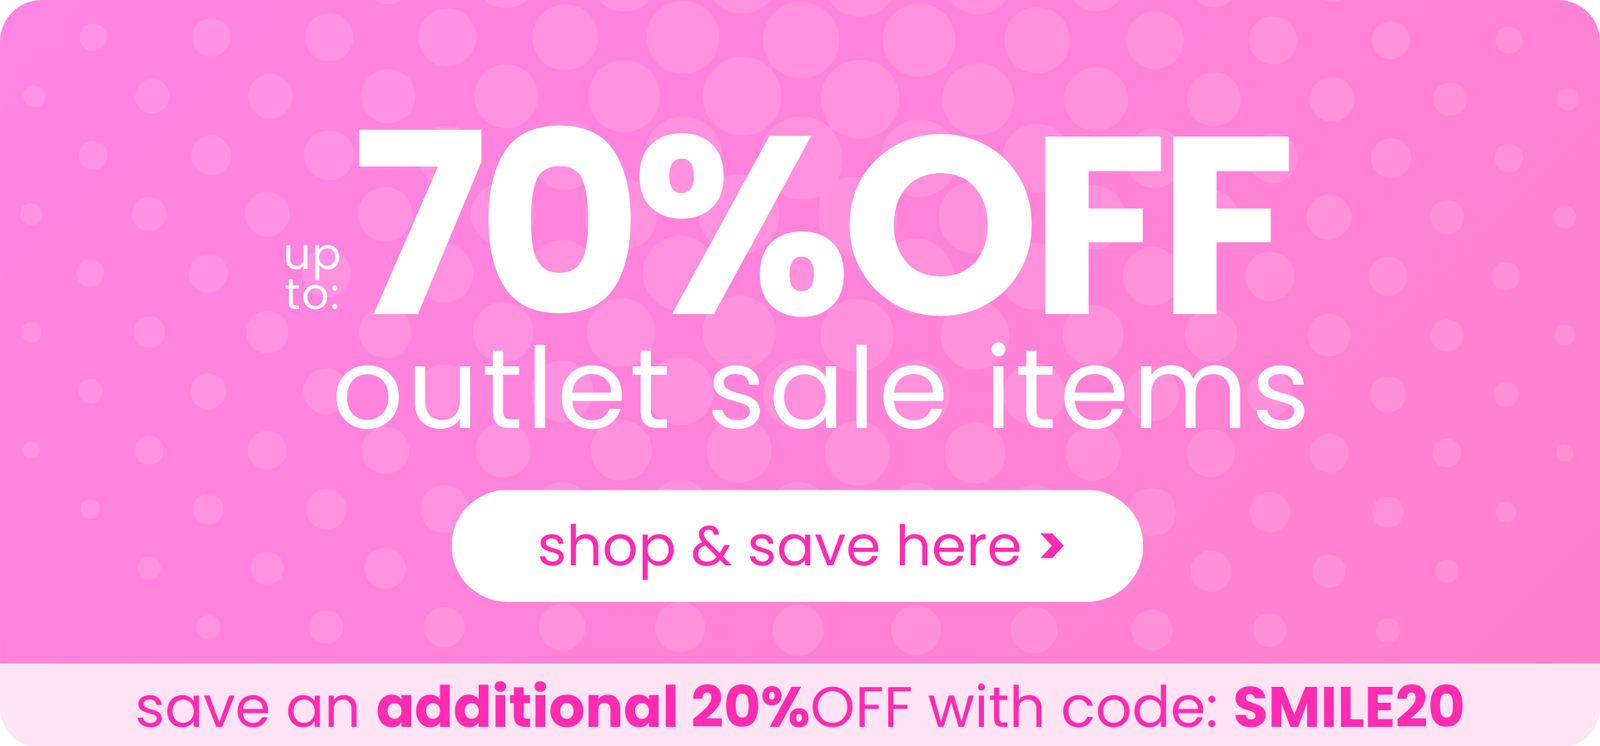 up to 70% off outlet sale items - save an additional 20% OFF with code: SMILE20